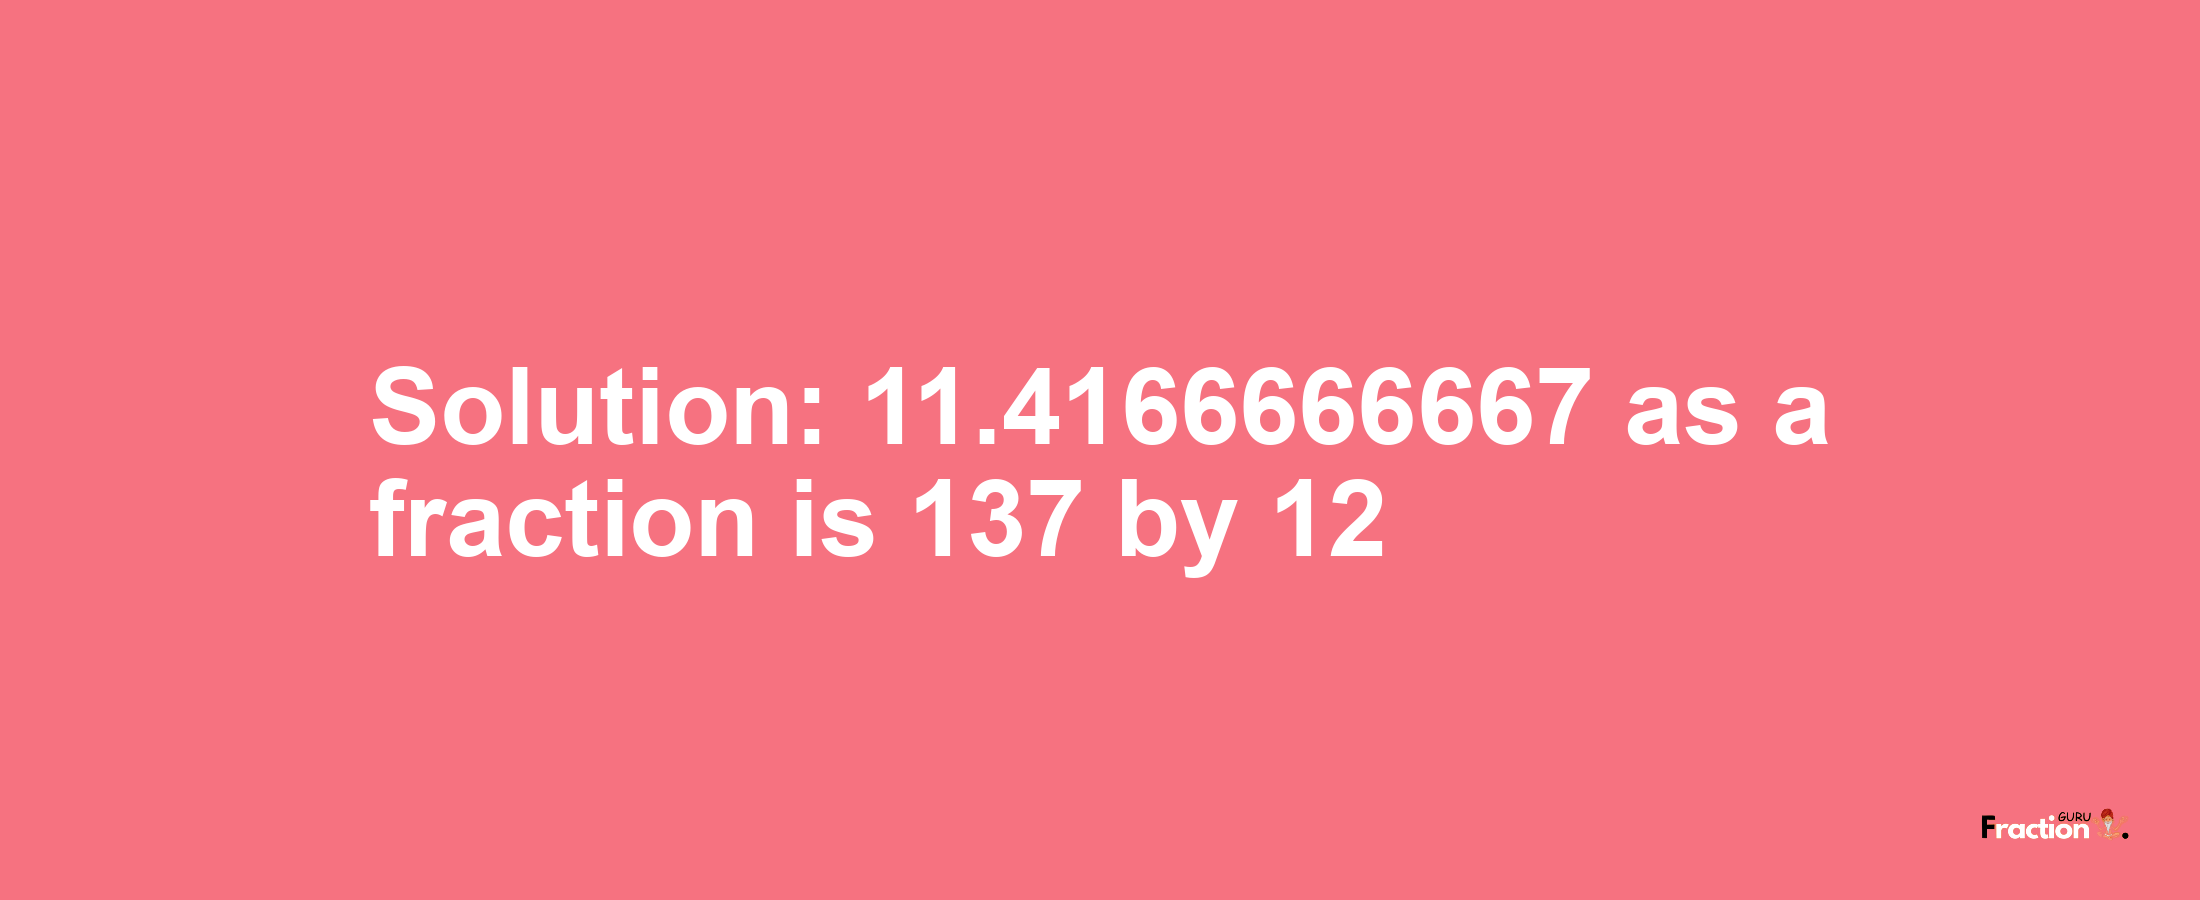 Solution:11.4166666667 as a fraction is 137/12